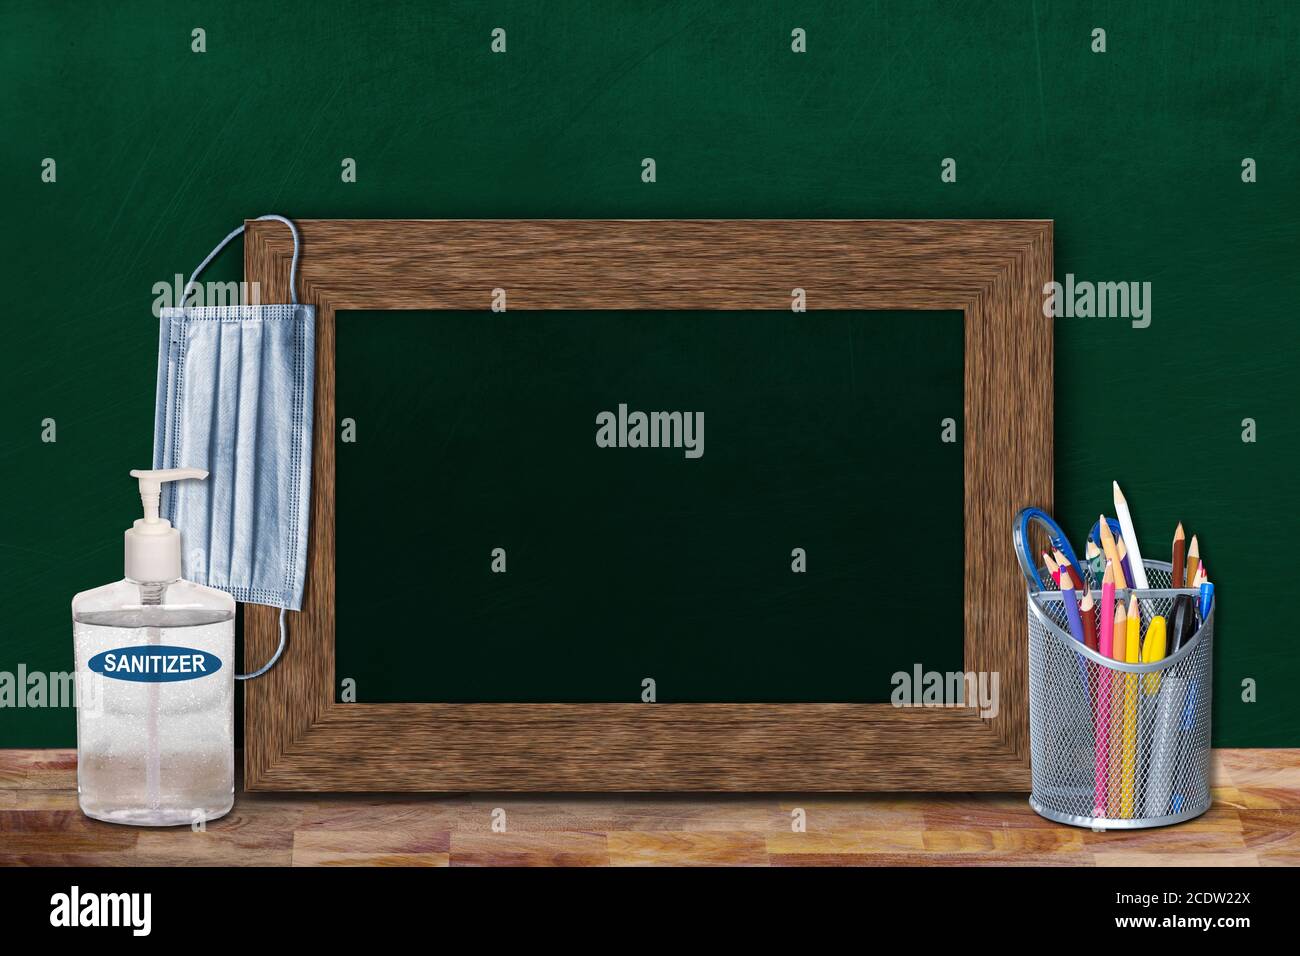 COVID-19 new normal education back to school concept in the classroom setting showing framed chalkboard with copy space and face mask, hand sanitizer Stock Photo